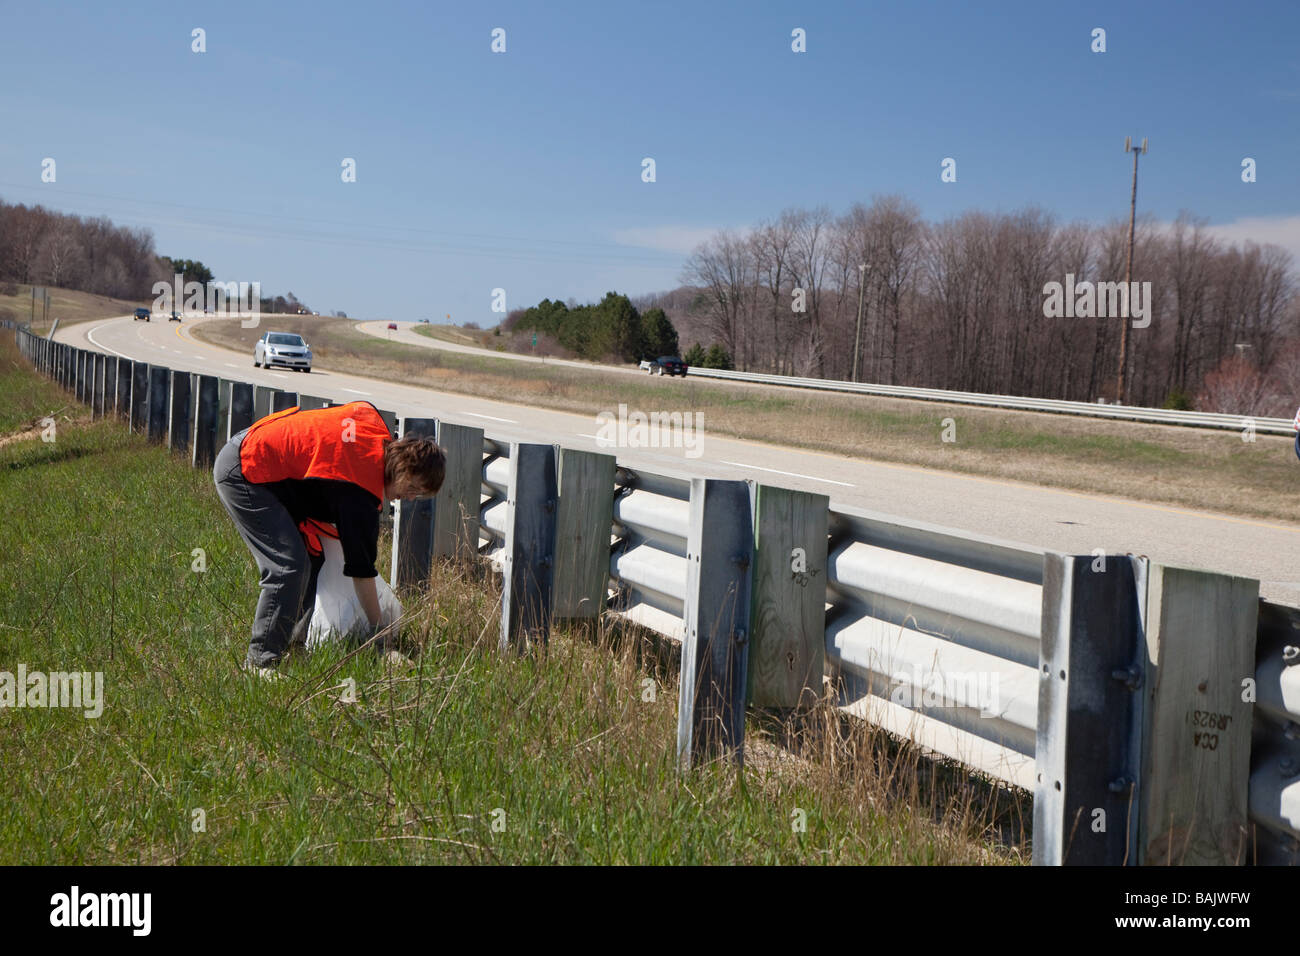 February 12, 2023 - Adopt-a-Highway Litter Cleanup